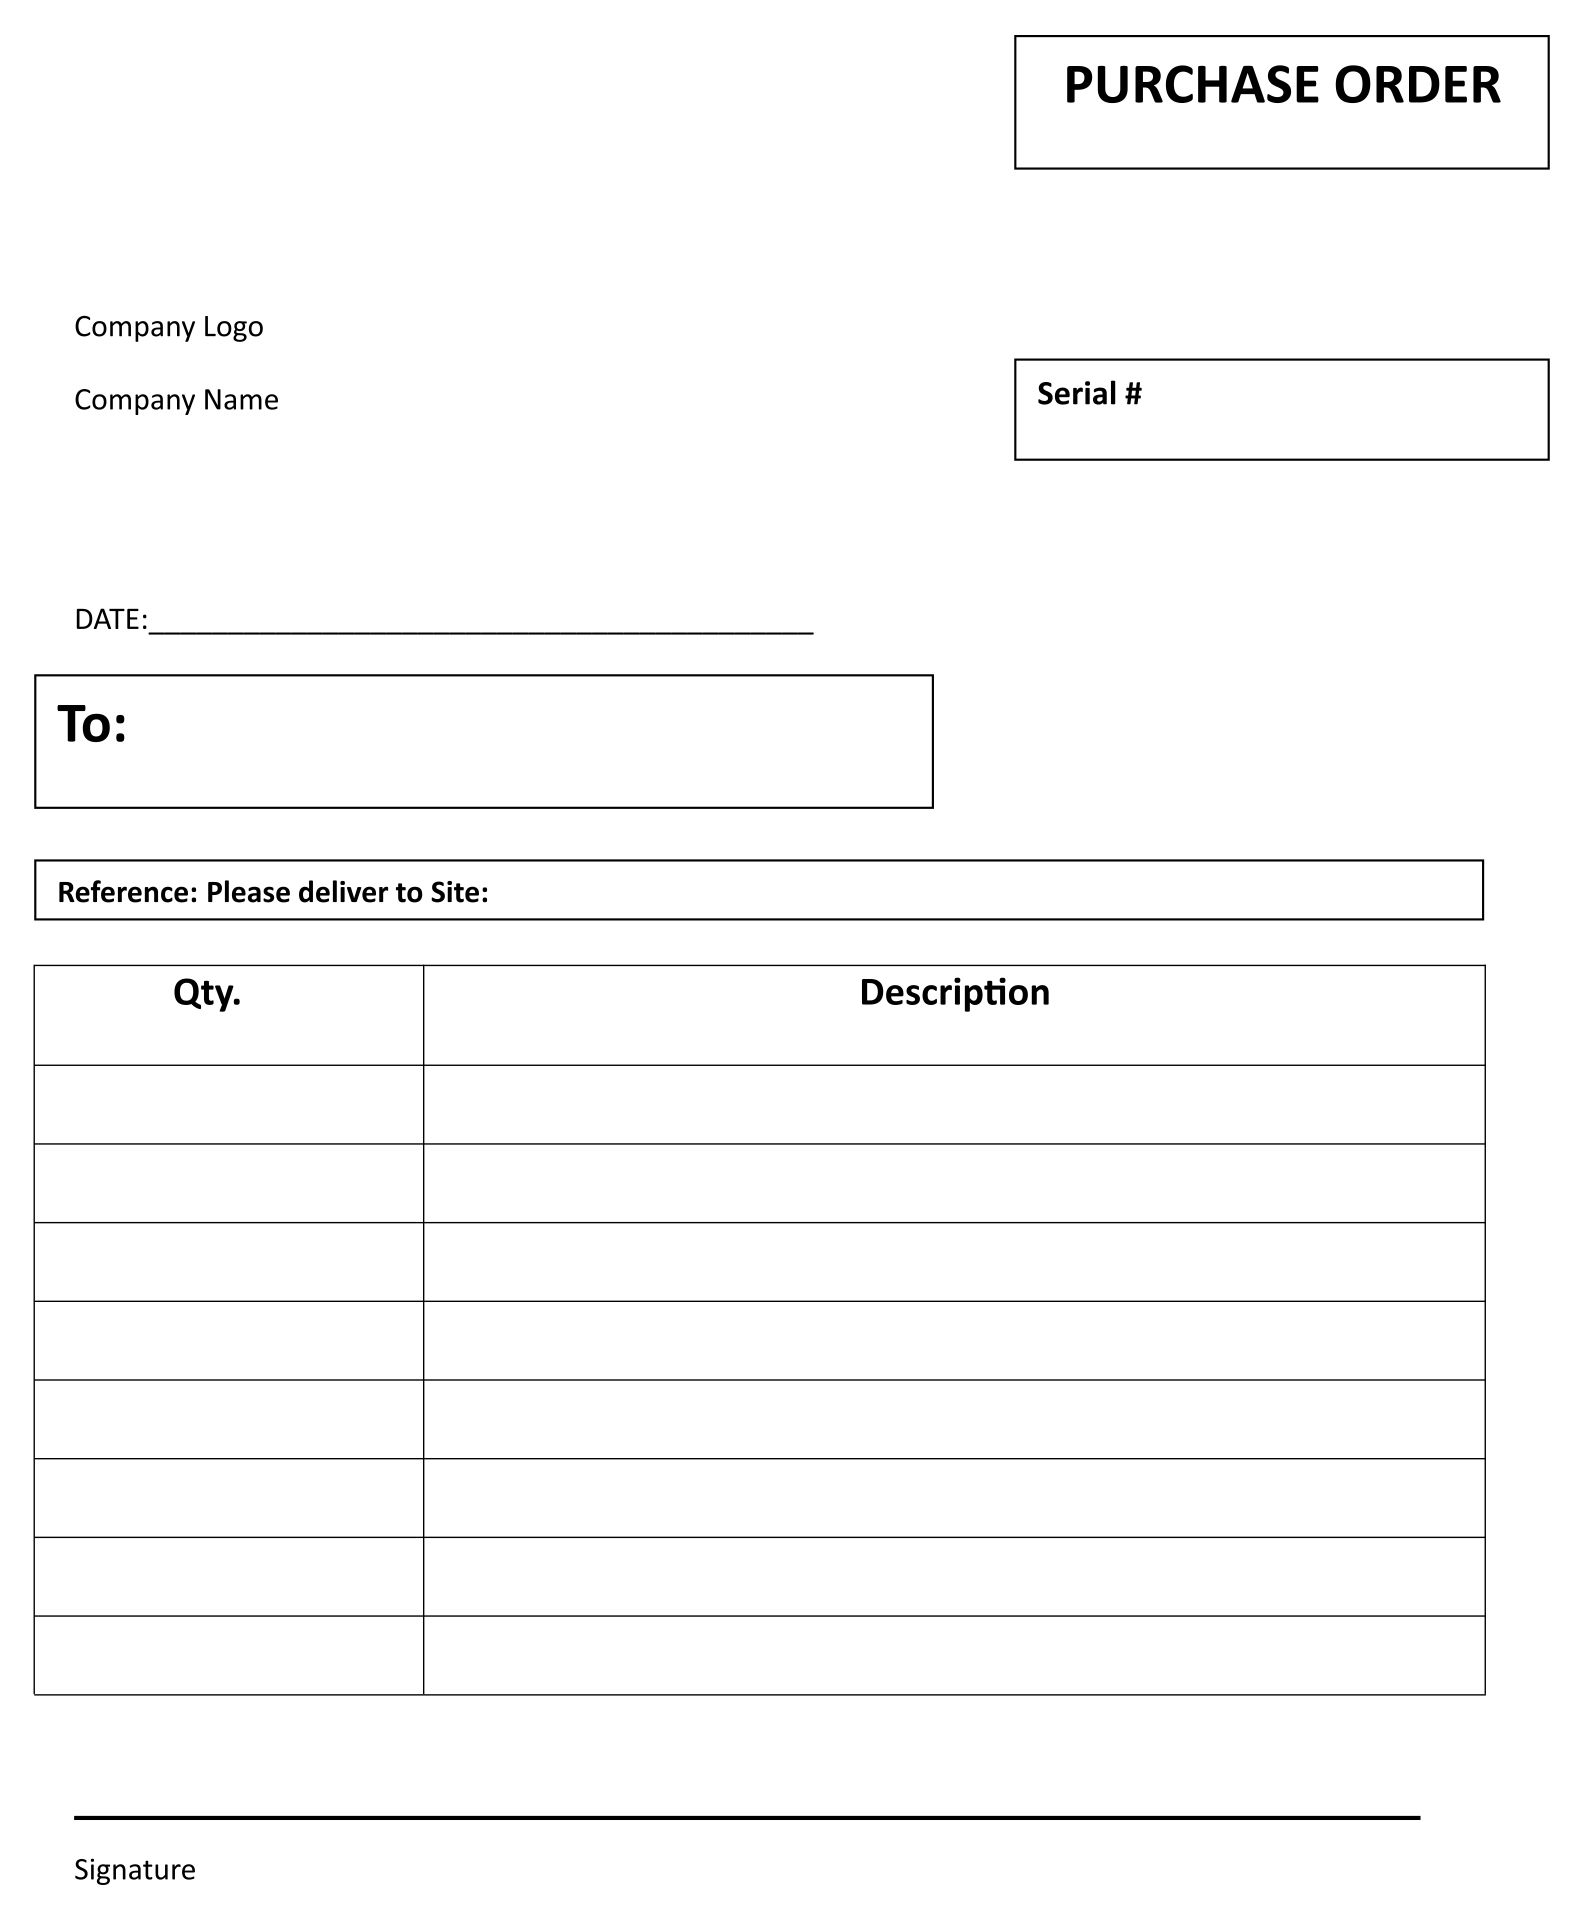 Printable Blank Purchase Order Forms